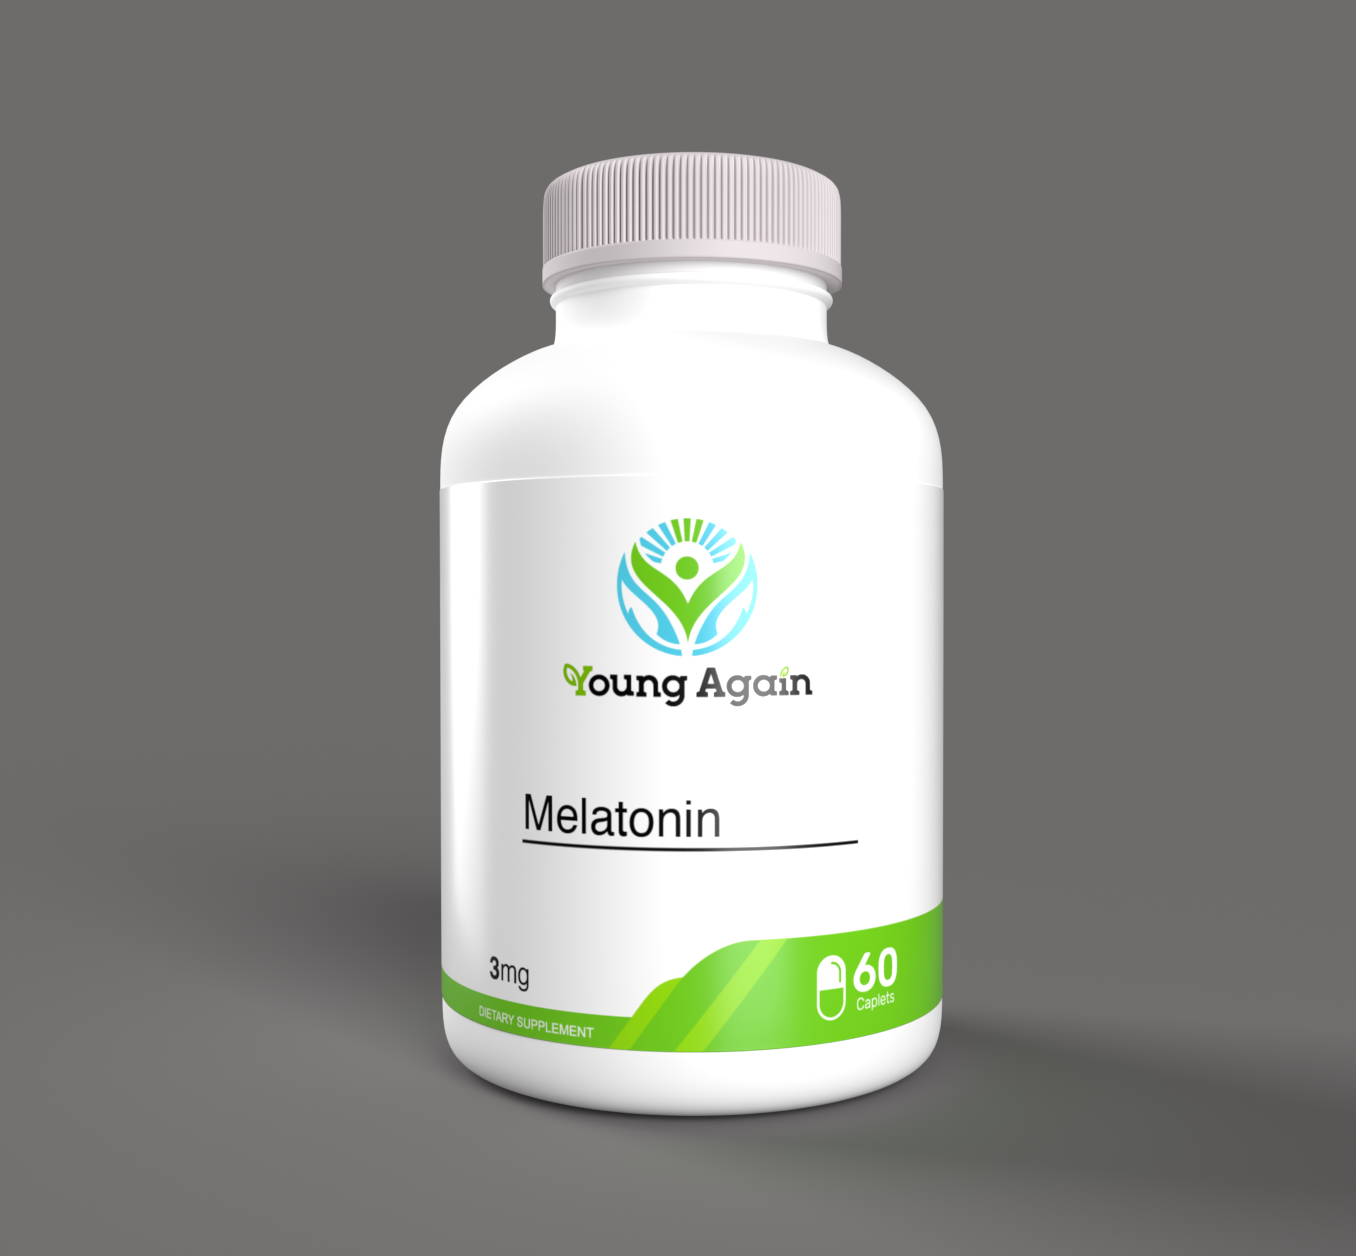 Sleep Soundly and Support Your Well-being with Melatonin from Young Again